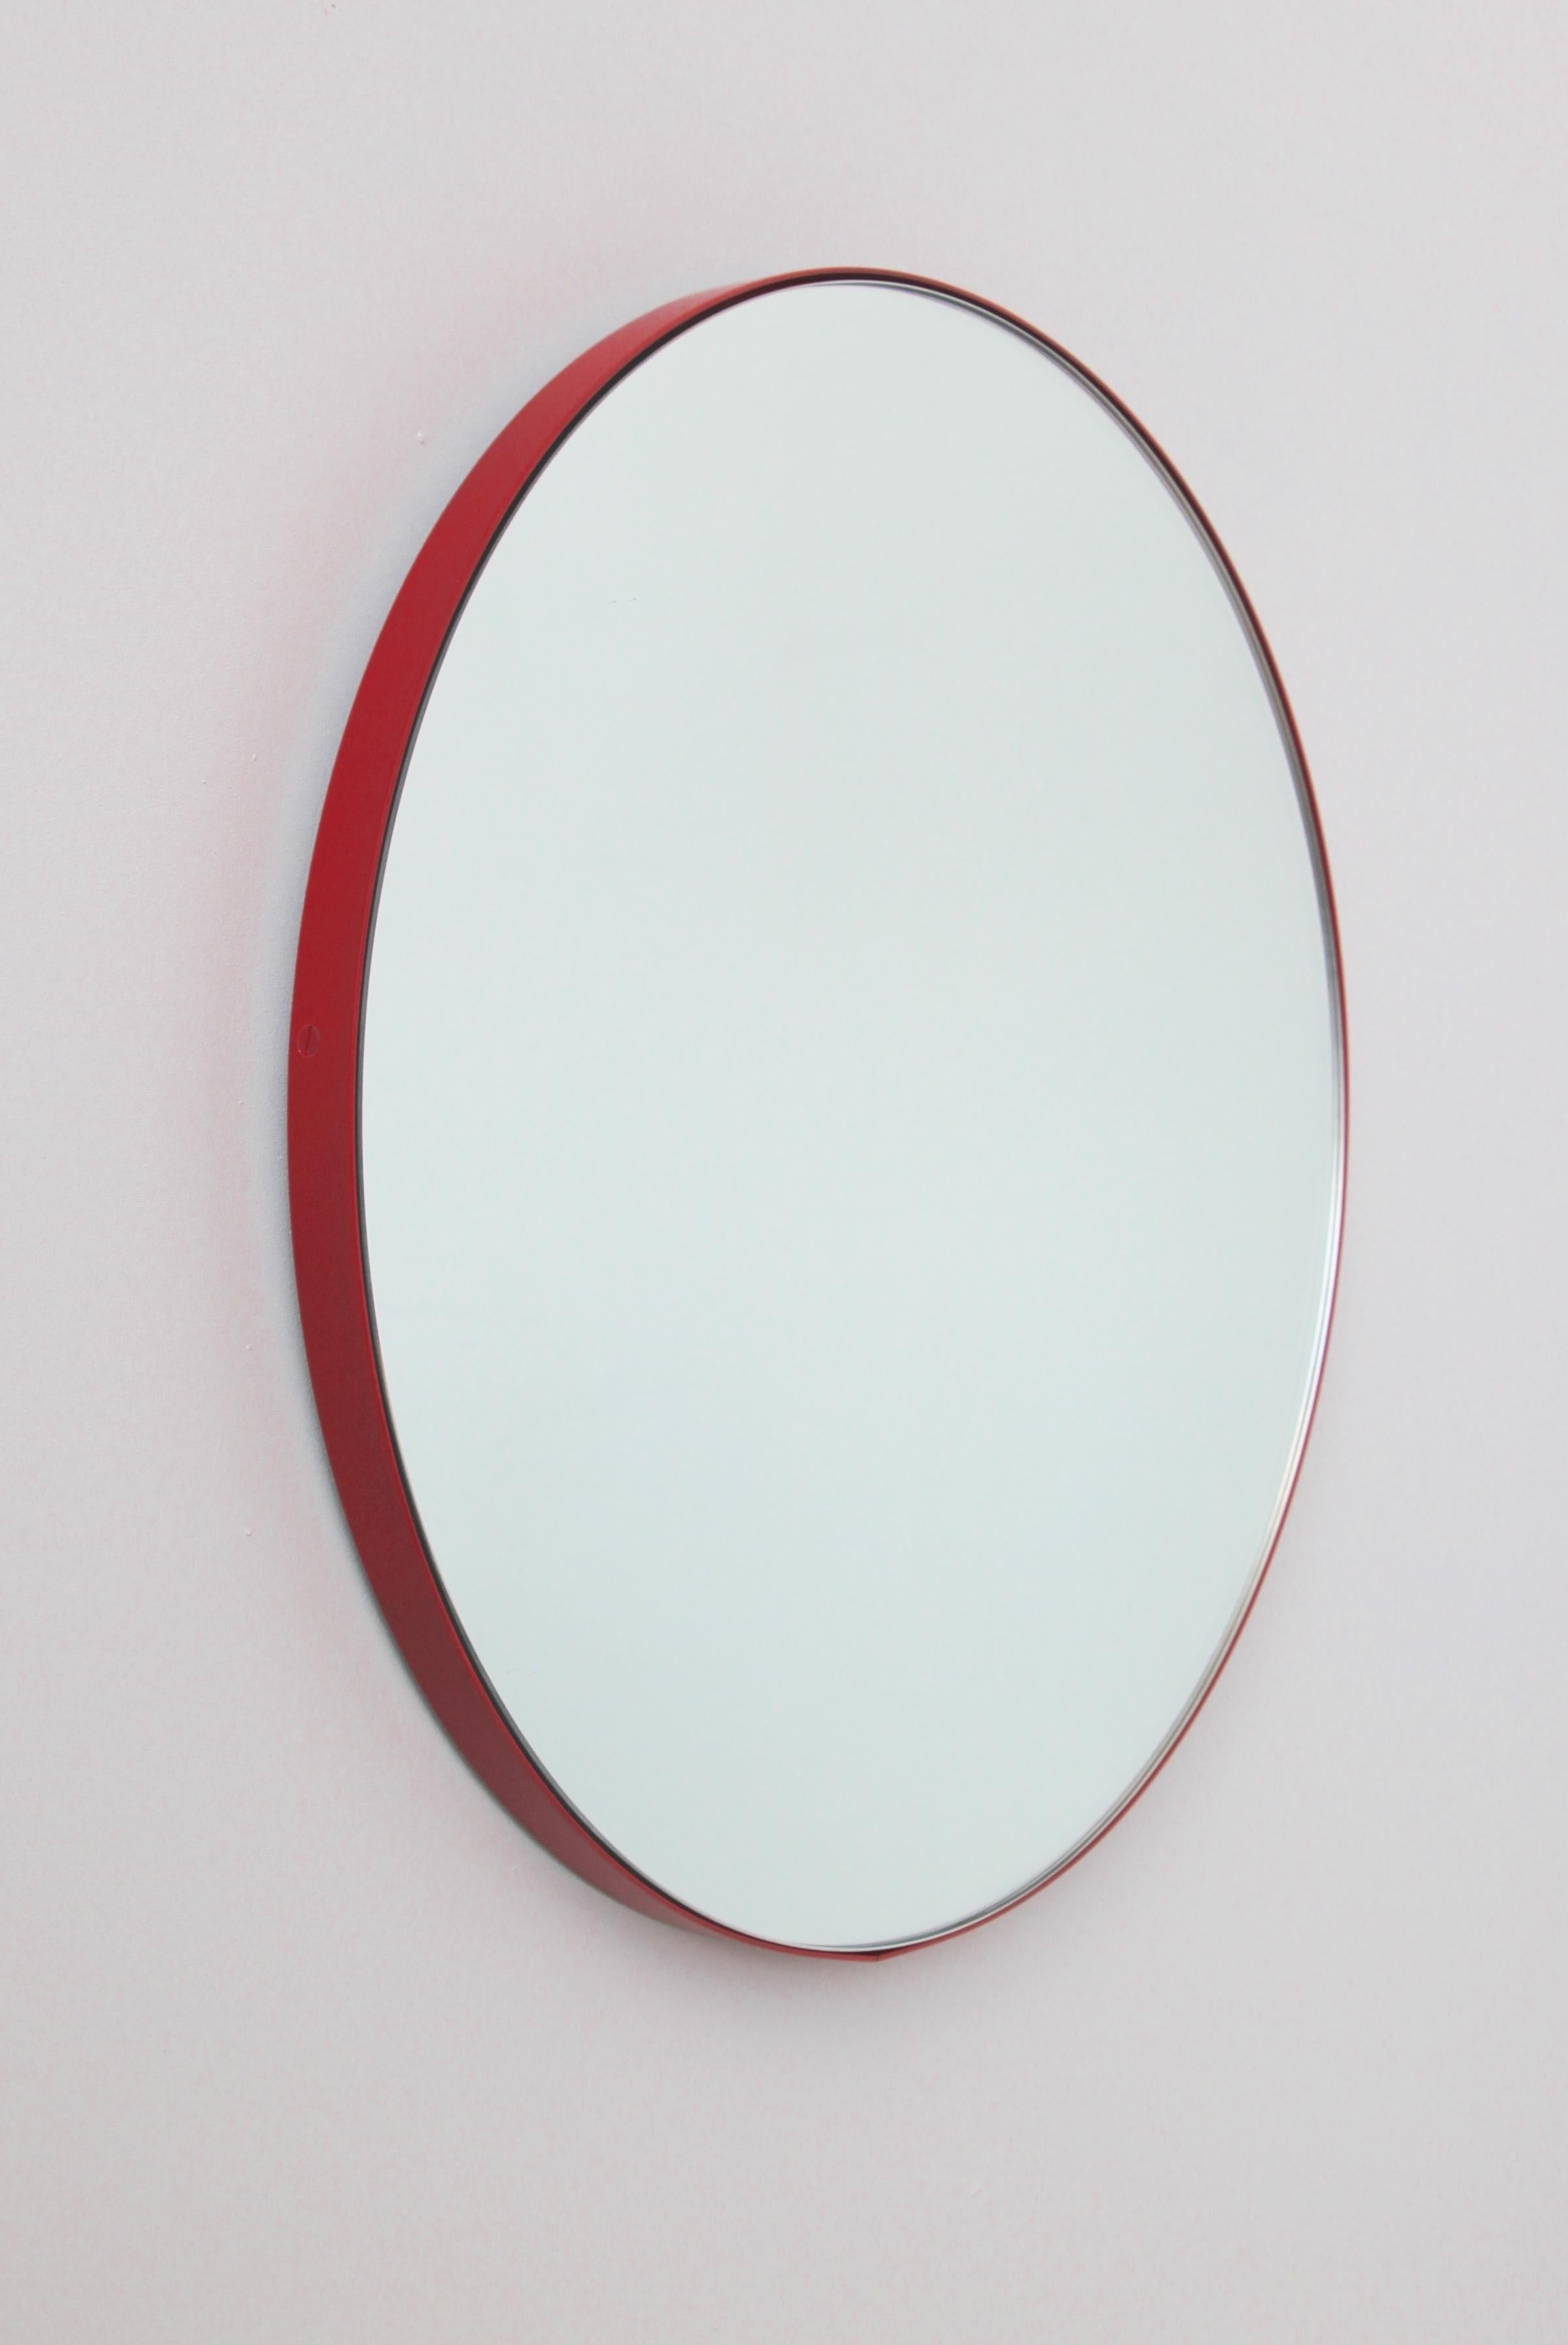 Orbis Round Modern Mirror with Handcrafted Red Frame, XL For Sale 2